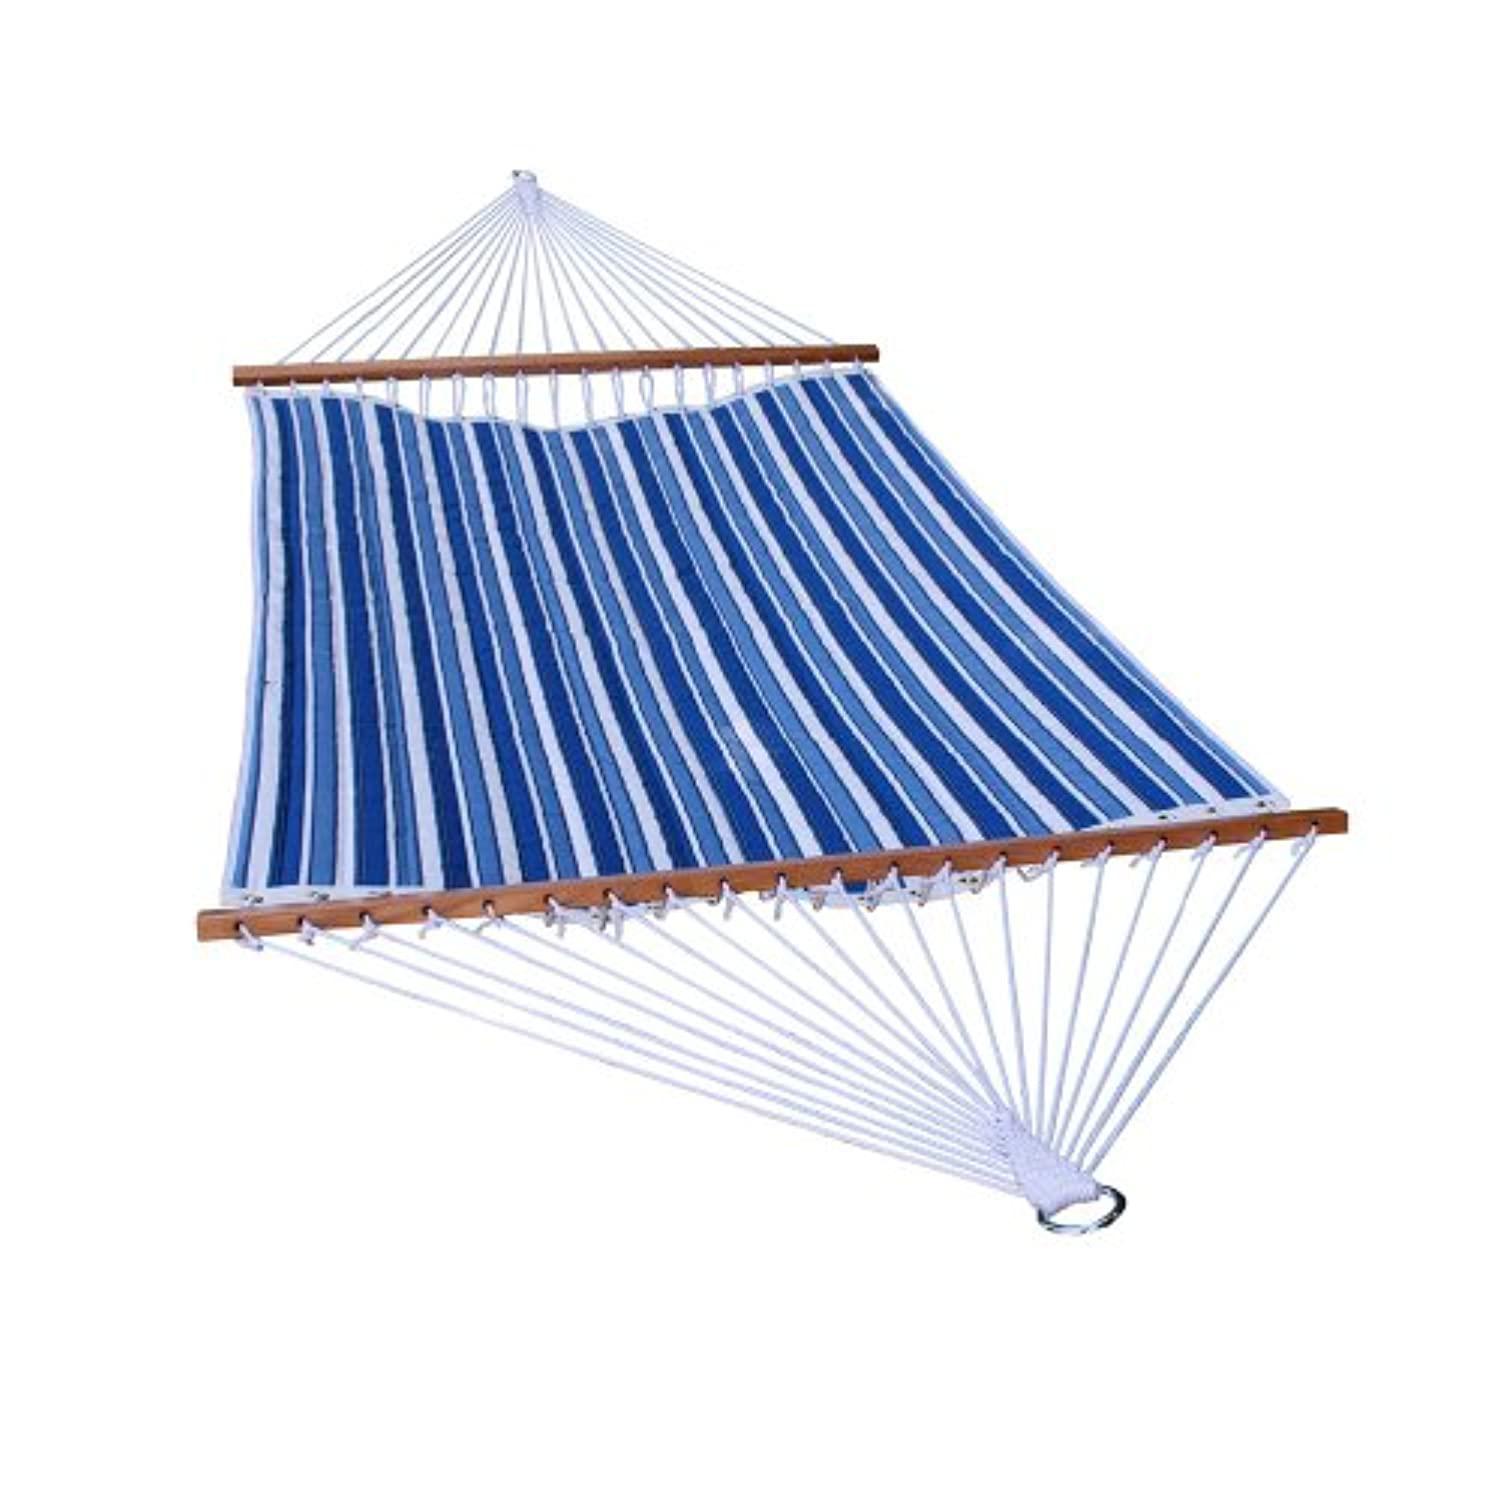 Algoma Net Company algoma 2789w-135142 two point quilted reversible hammock, tropical palm stripe blue/norway powder blue spun polyester